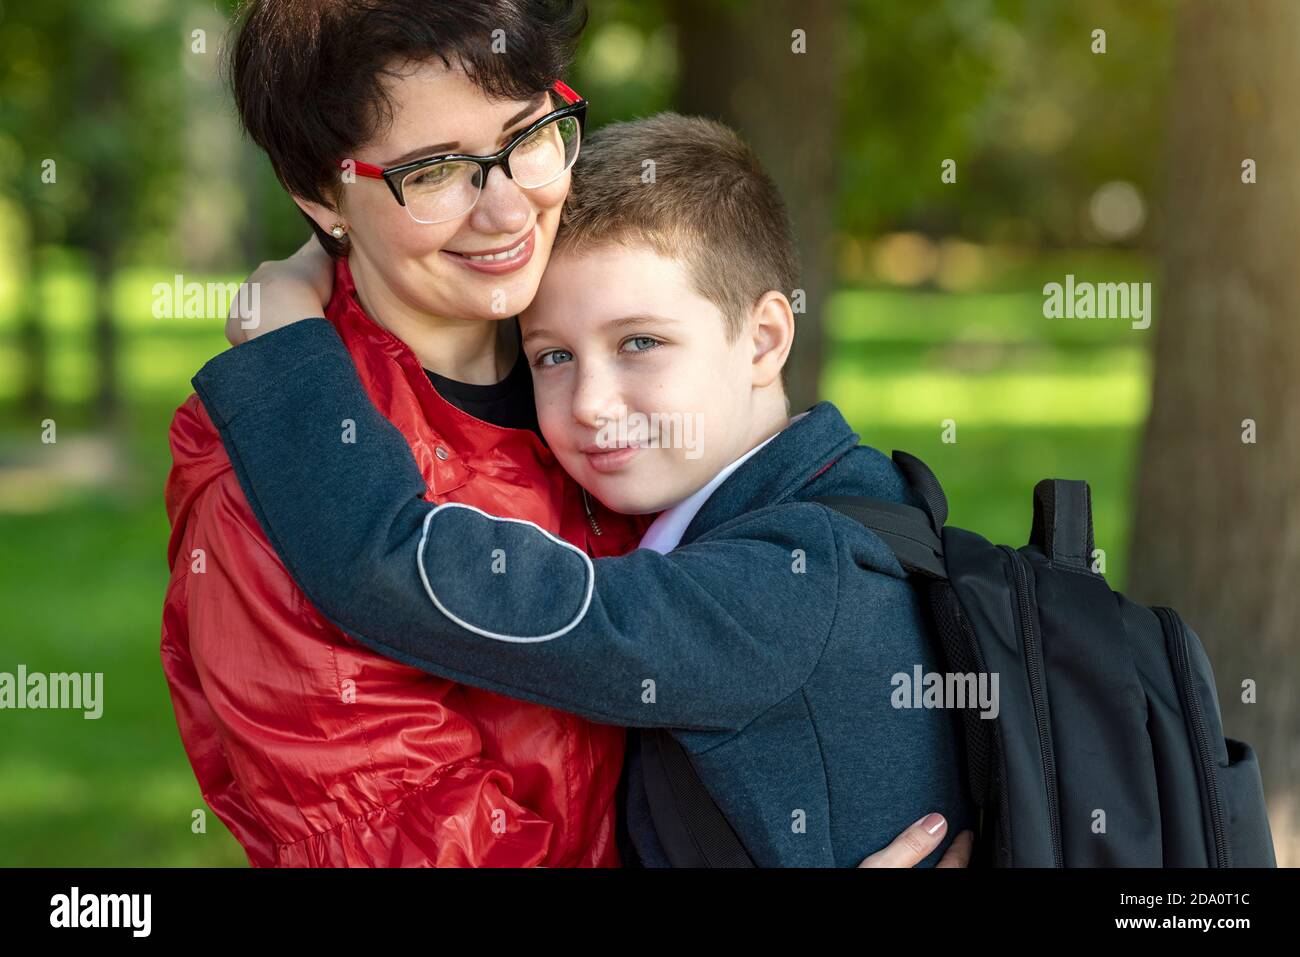 Happy mom and son hug each other. Maternal love, parenting, family relationships of trust. Stock Photo